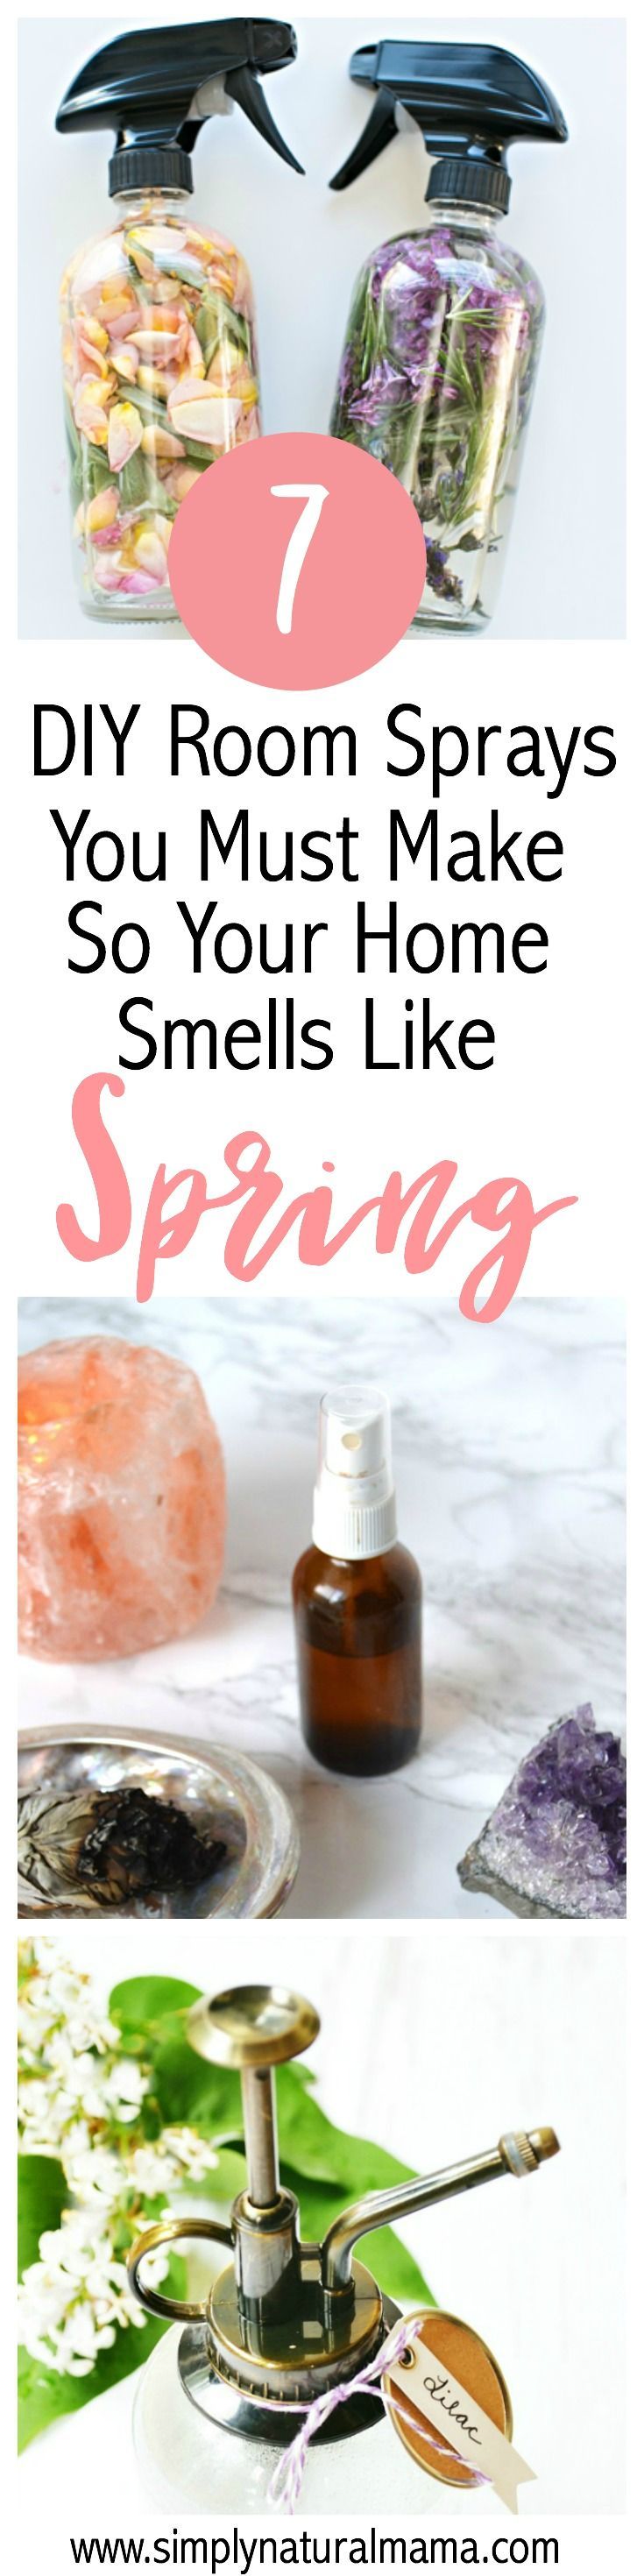 Wow! These 7 room sprays are really amazing and they do make your house smell like Spring! I can’t wait to use them in my home.